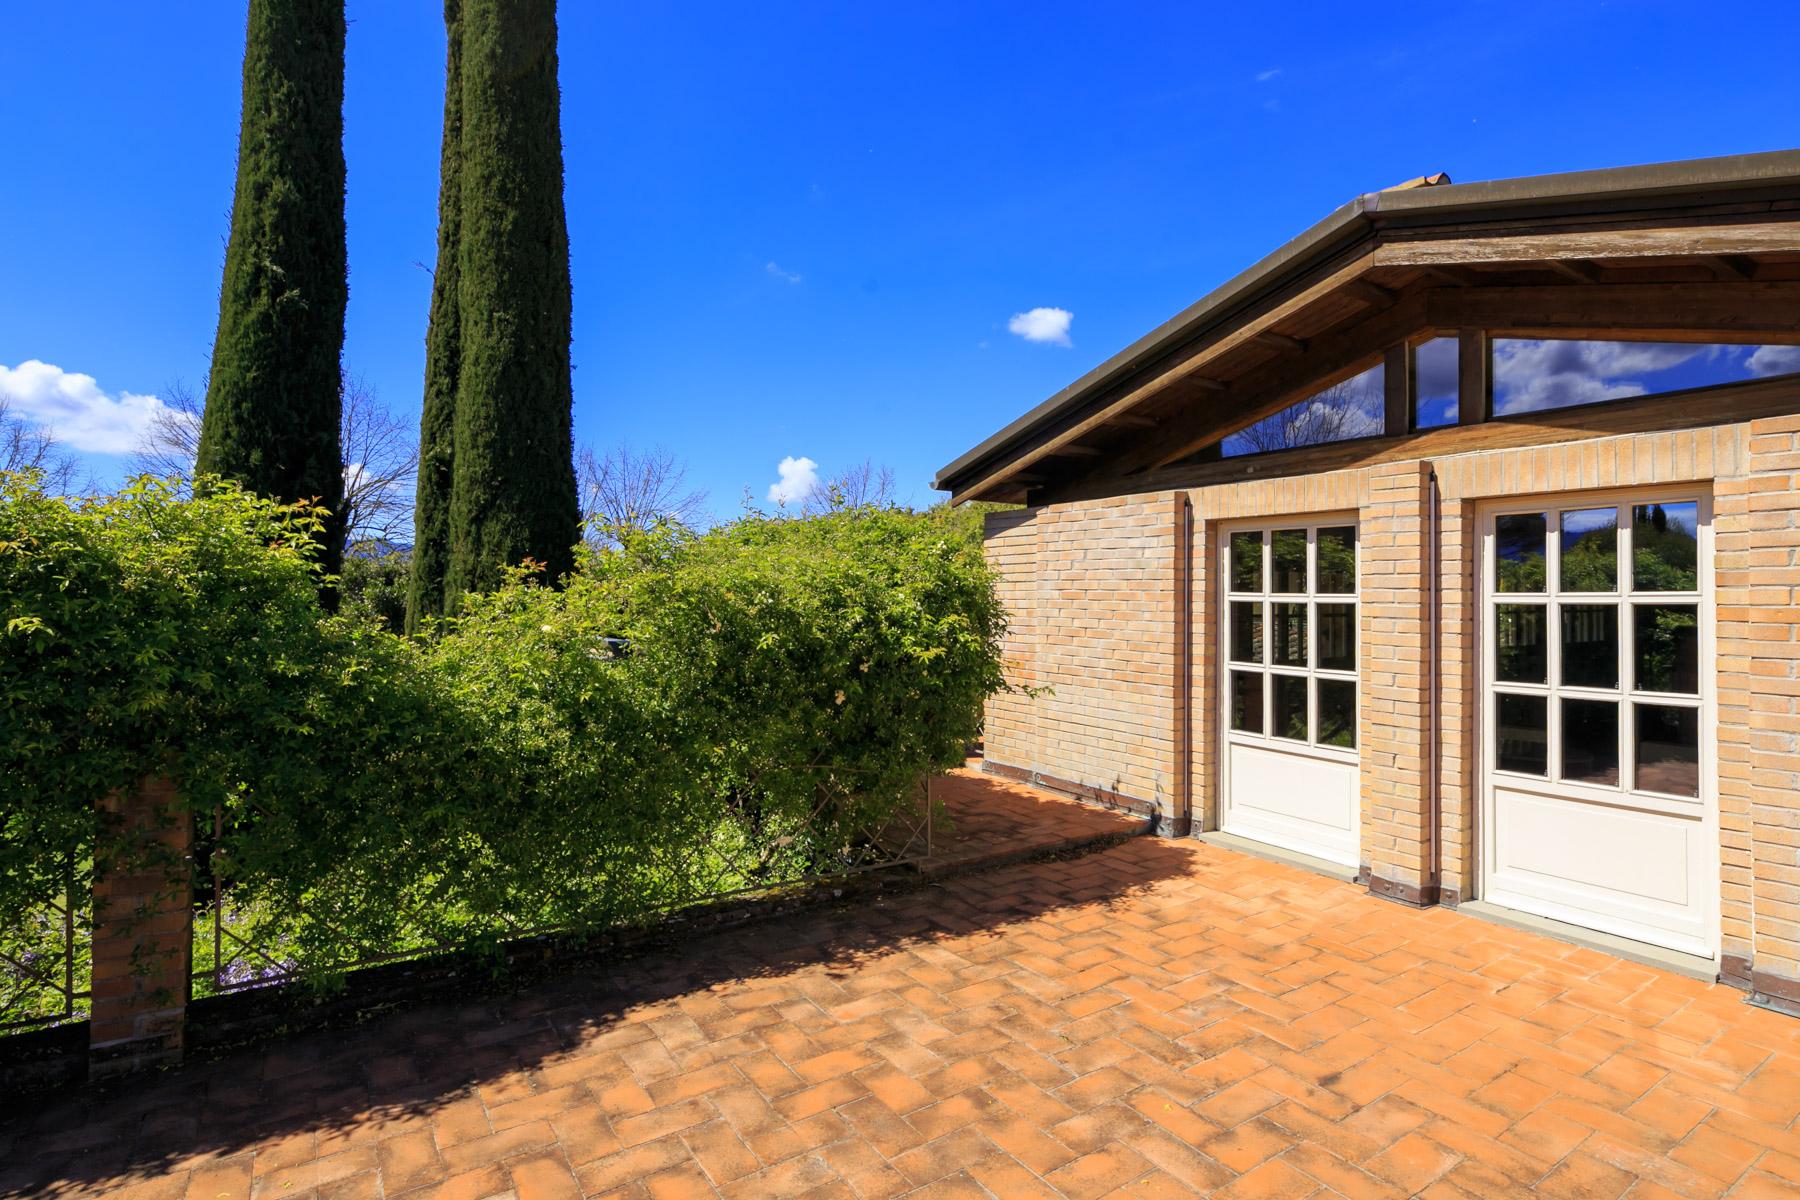 Romantic and modern Villa, between Lucca and the countryside - 17